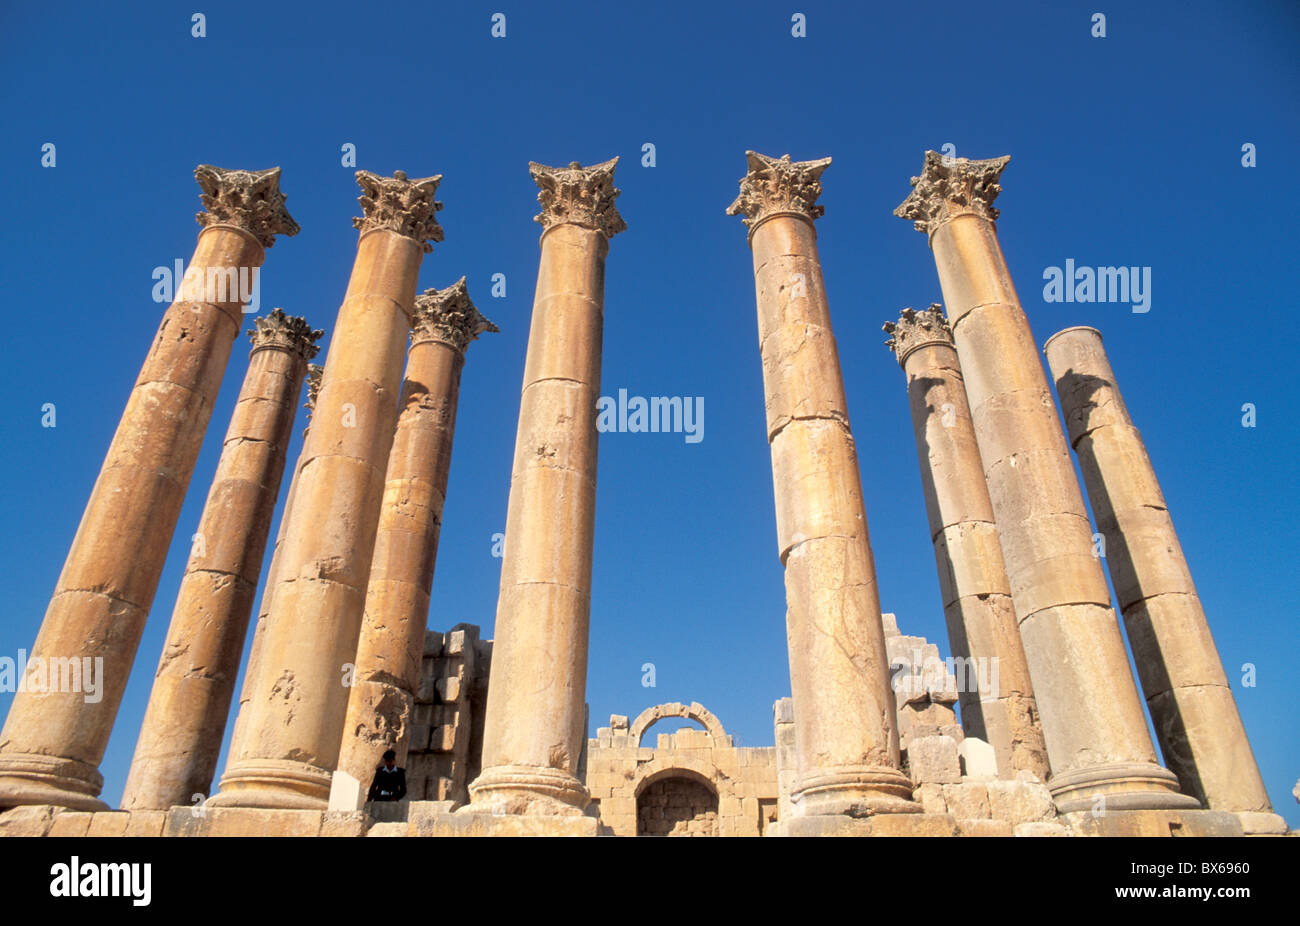 The Temple of Artemis, built in the 2nd century AD, Jerash, Jordan, Middle East Stock Photo